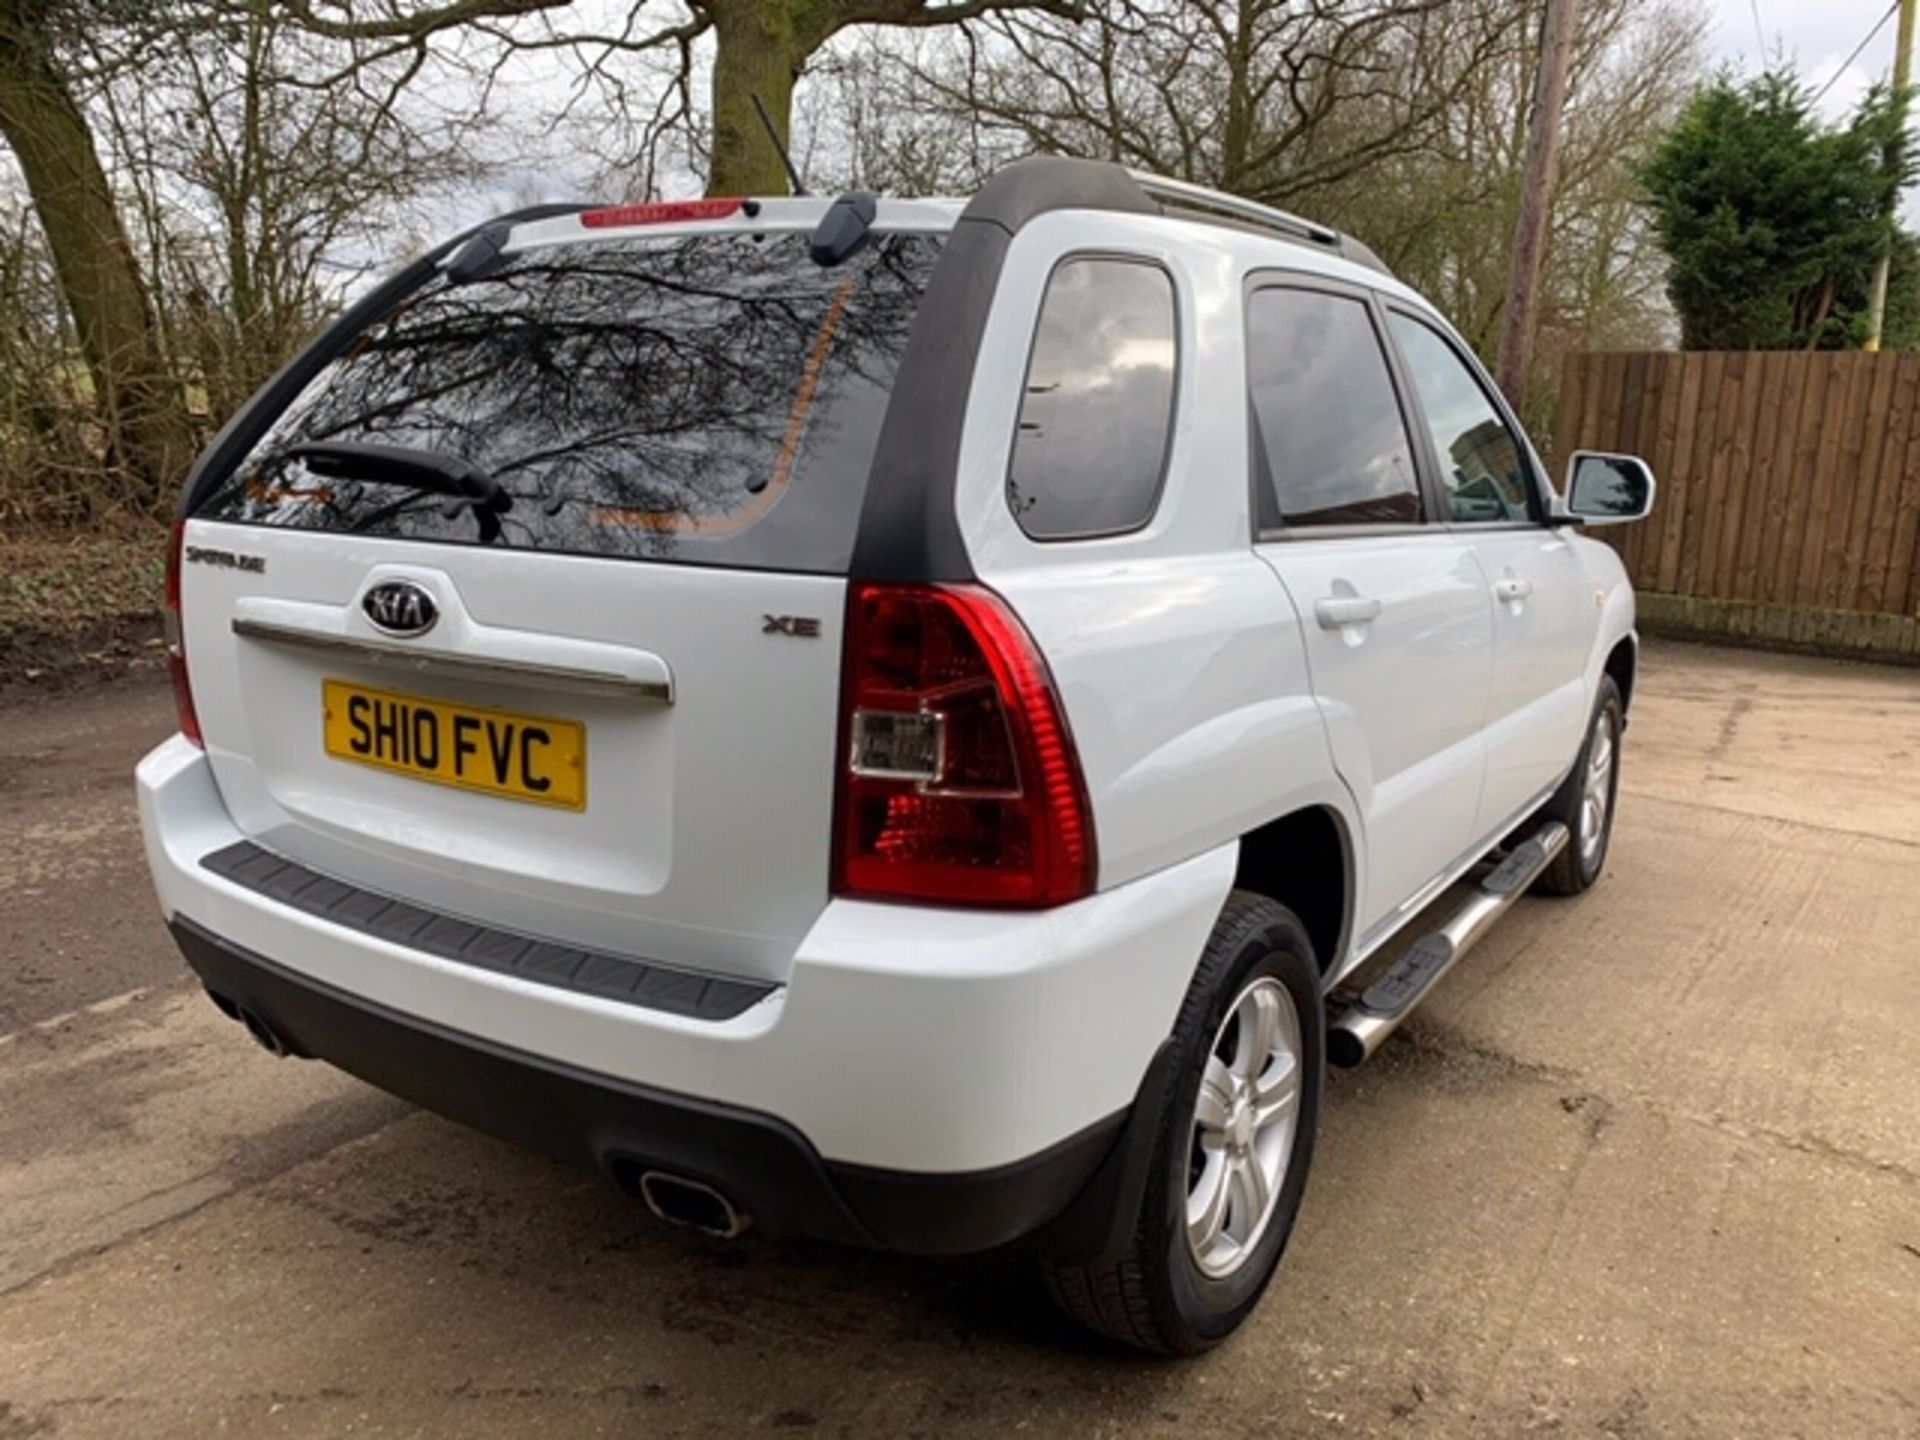 KIA SPORTAGE 4WD CAR, 5 SPEED MANUAL, 70,000 REC MILES APPROX, MOT TILL 11/03/21 WHEN TESTED WAS - Image 2 of 7